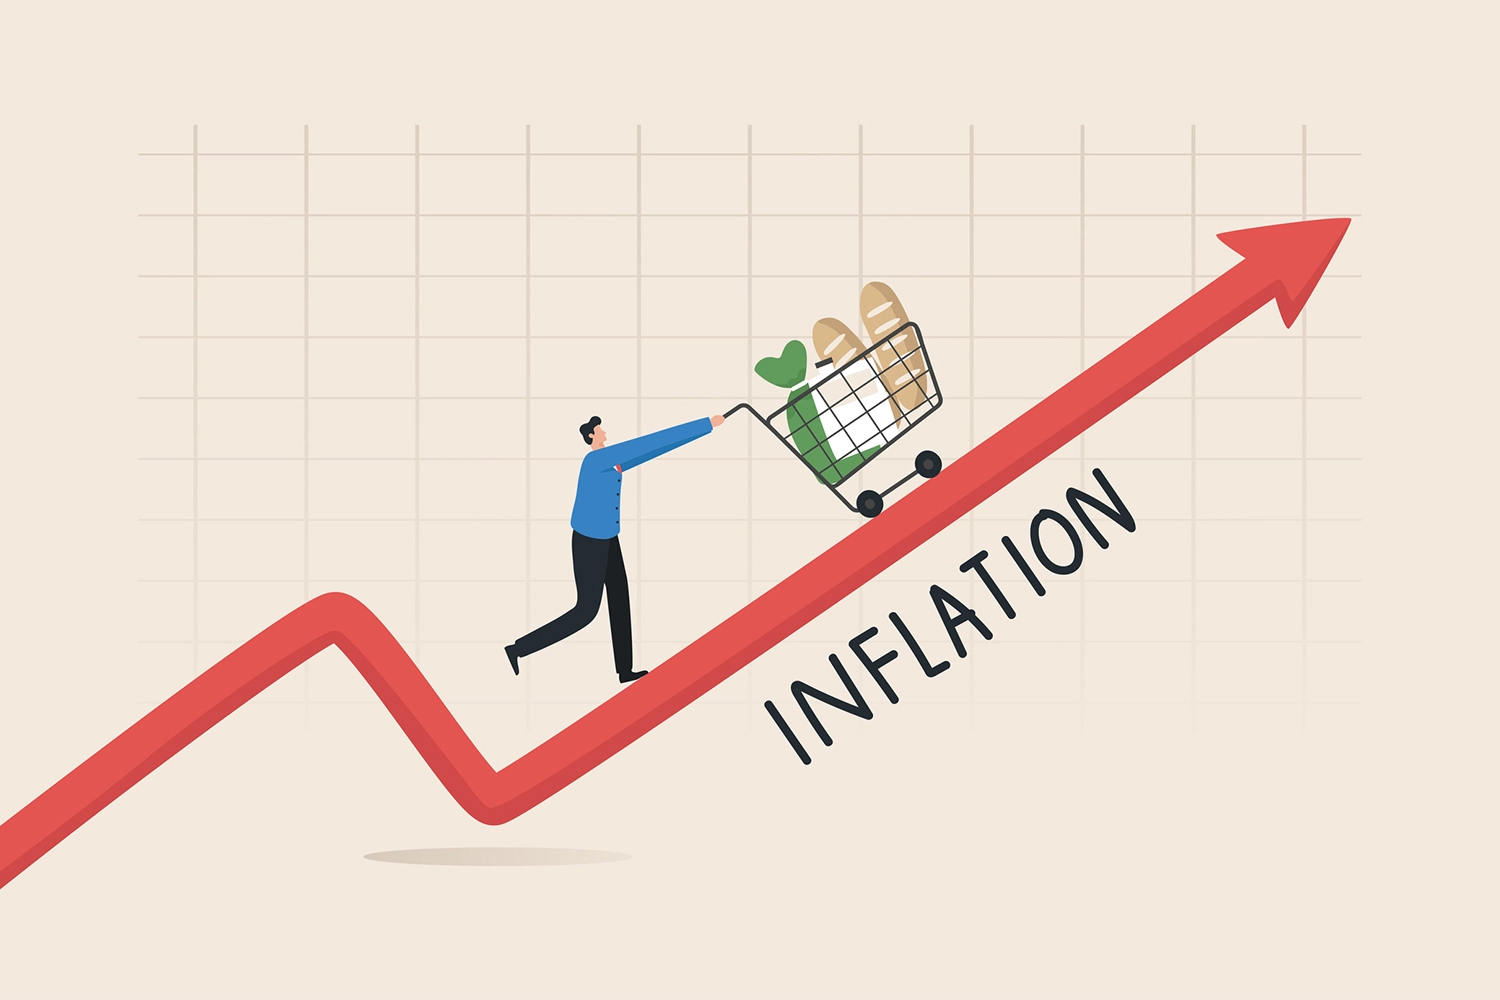 Why Do Inflation Occur?